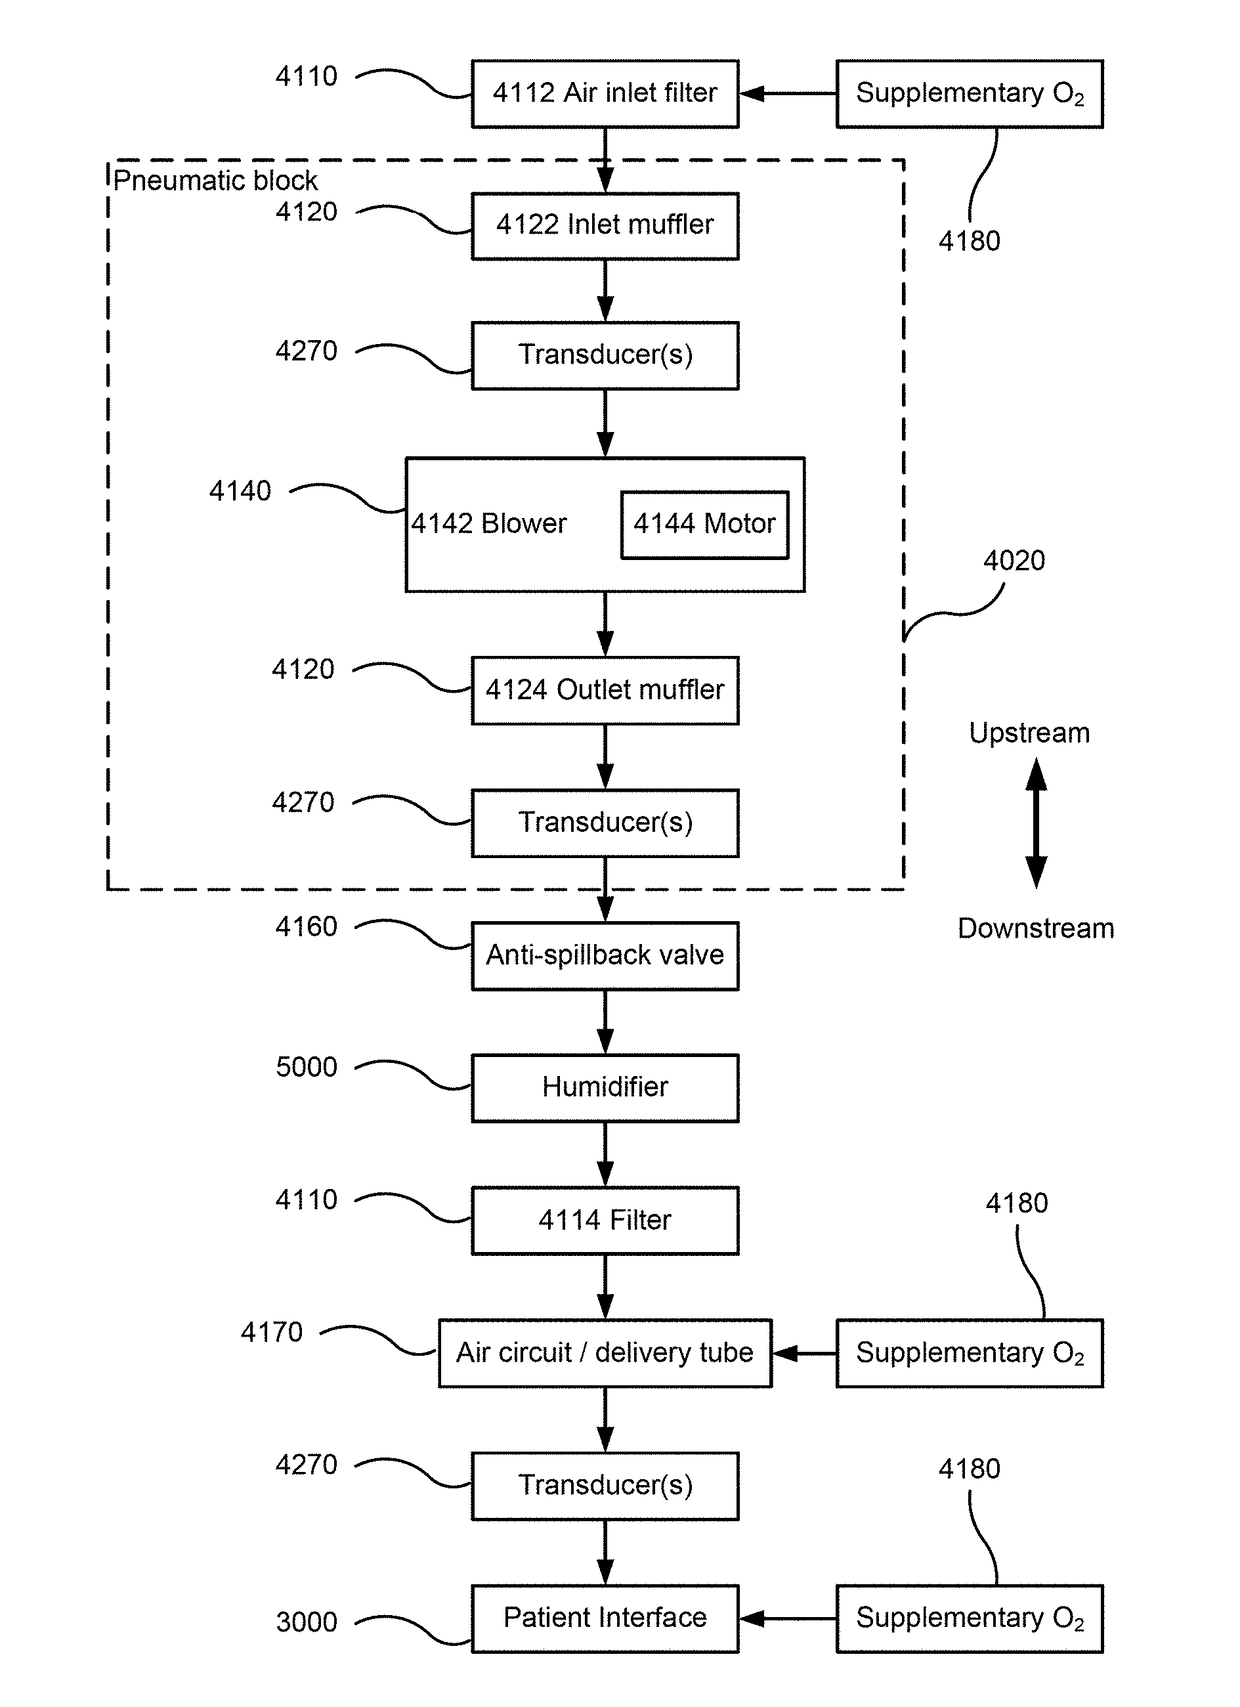 Apparatus and method for adaptive ramped control of positive airway pressure (PAP)